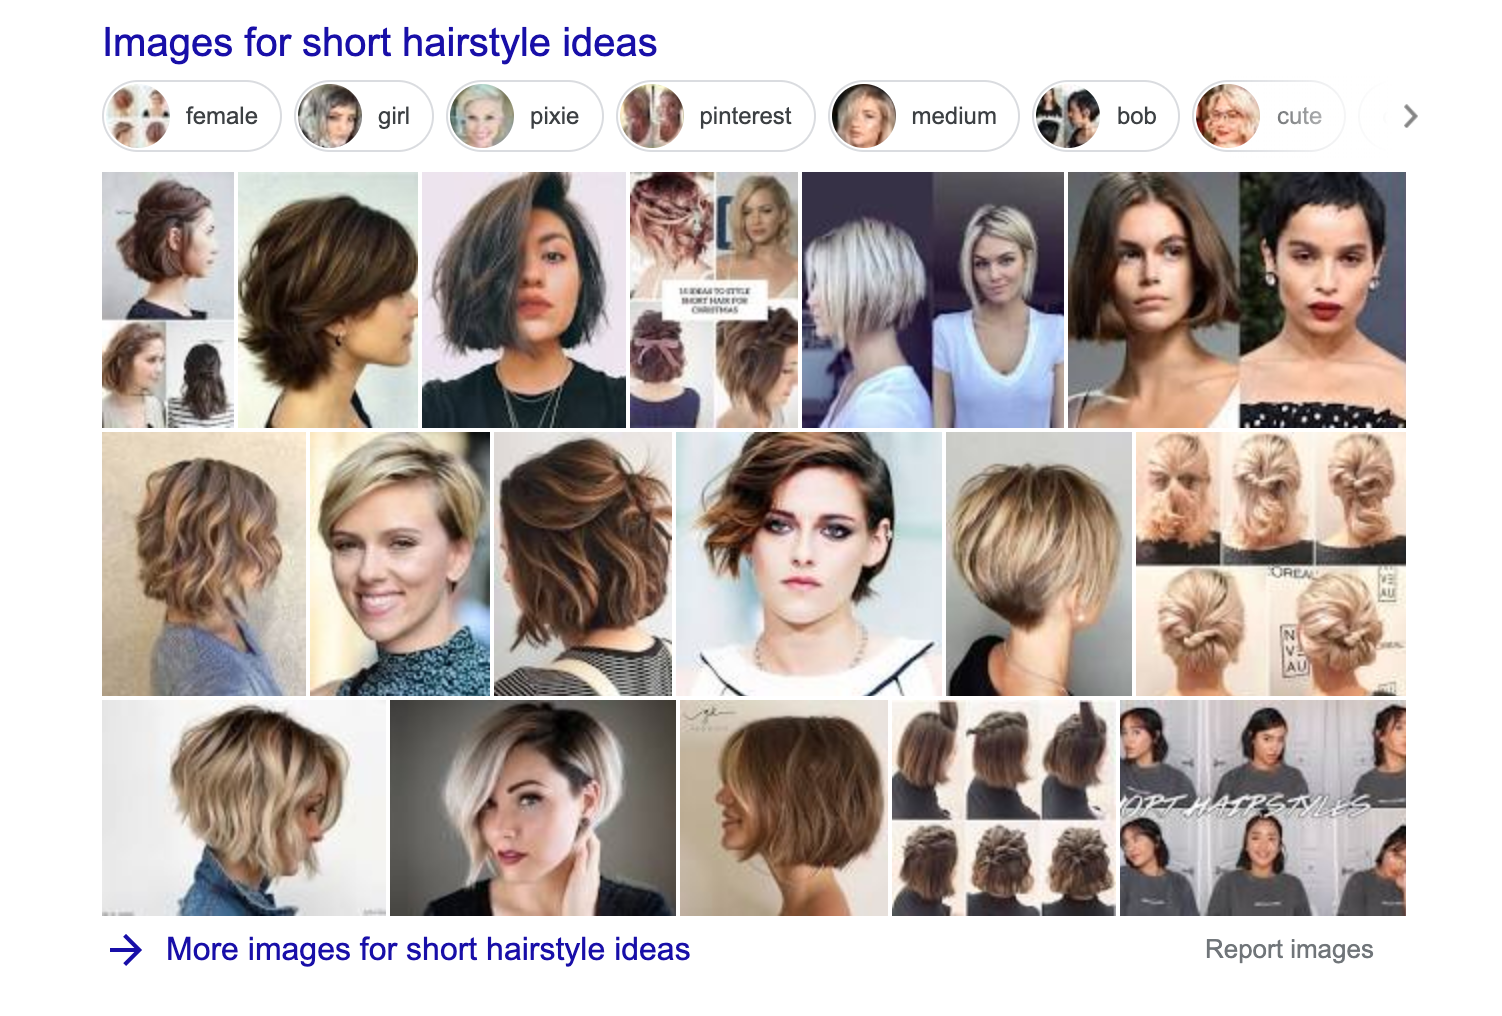 picture carousel in SERP for "short hairstyle ideas query"